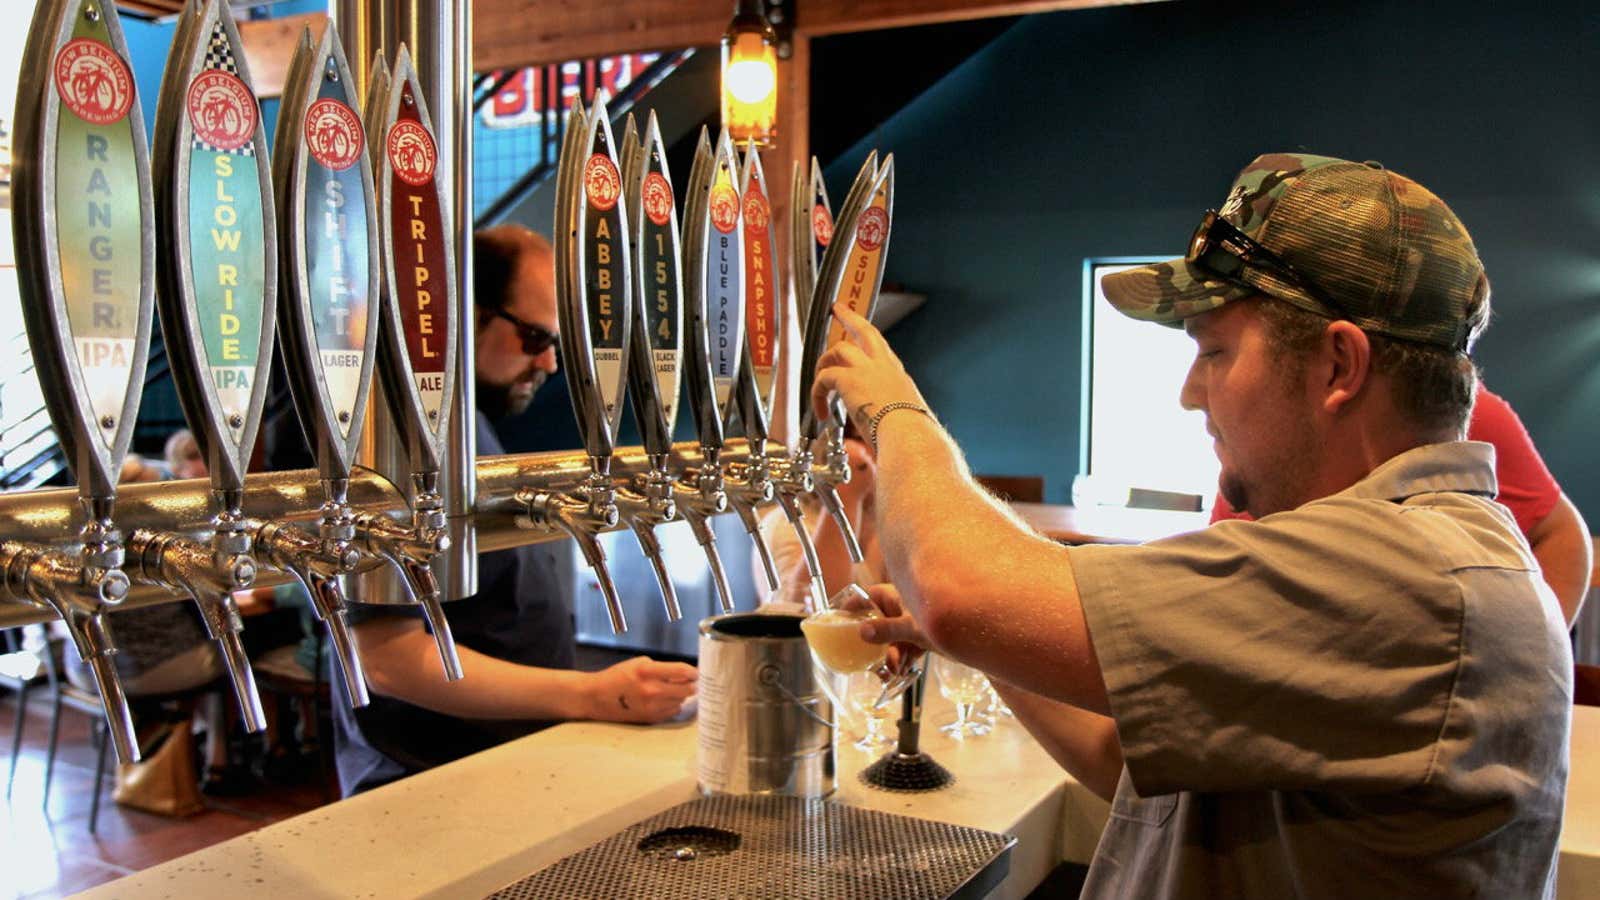 A bartender pours at the New Belgium brewery.